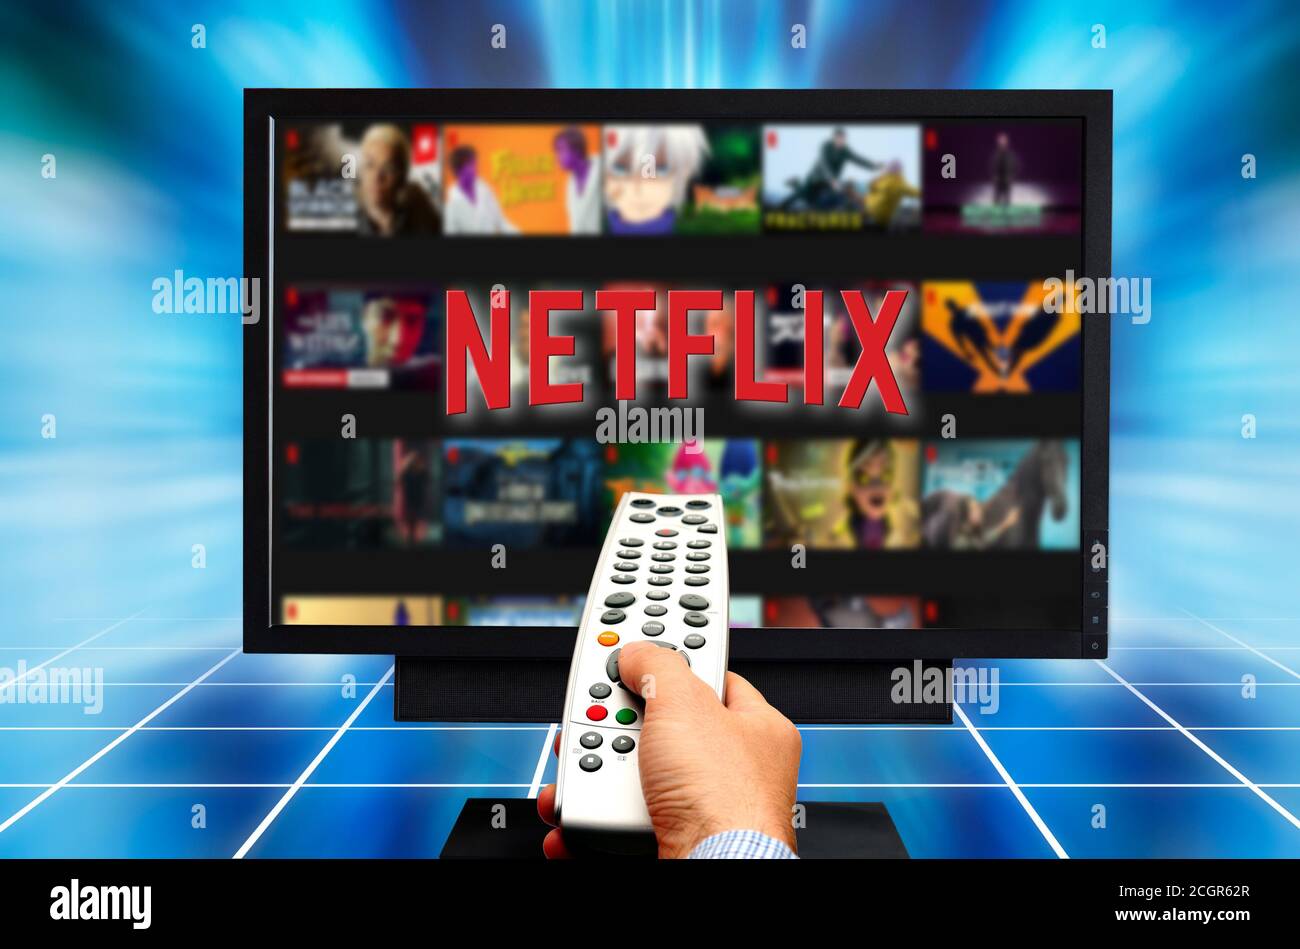 hand holding remote and choosing a program to watch on netflix Stock Photo